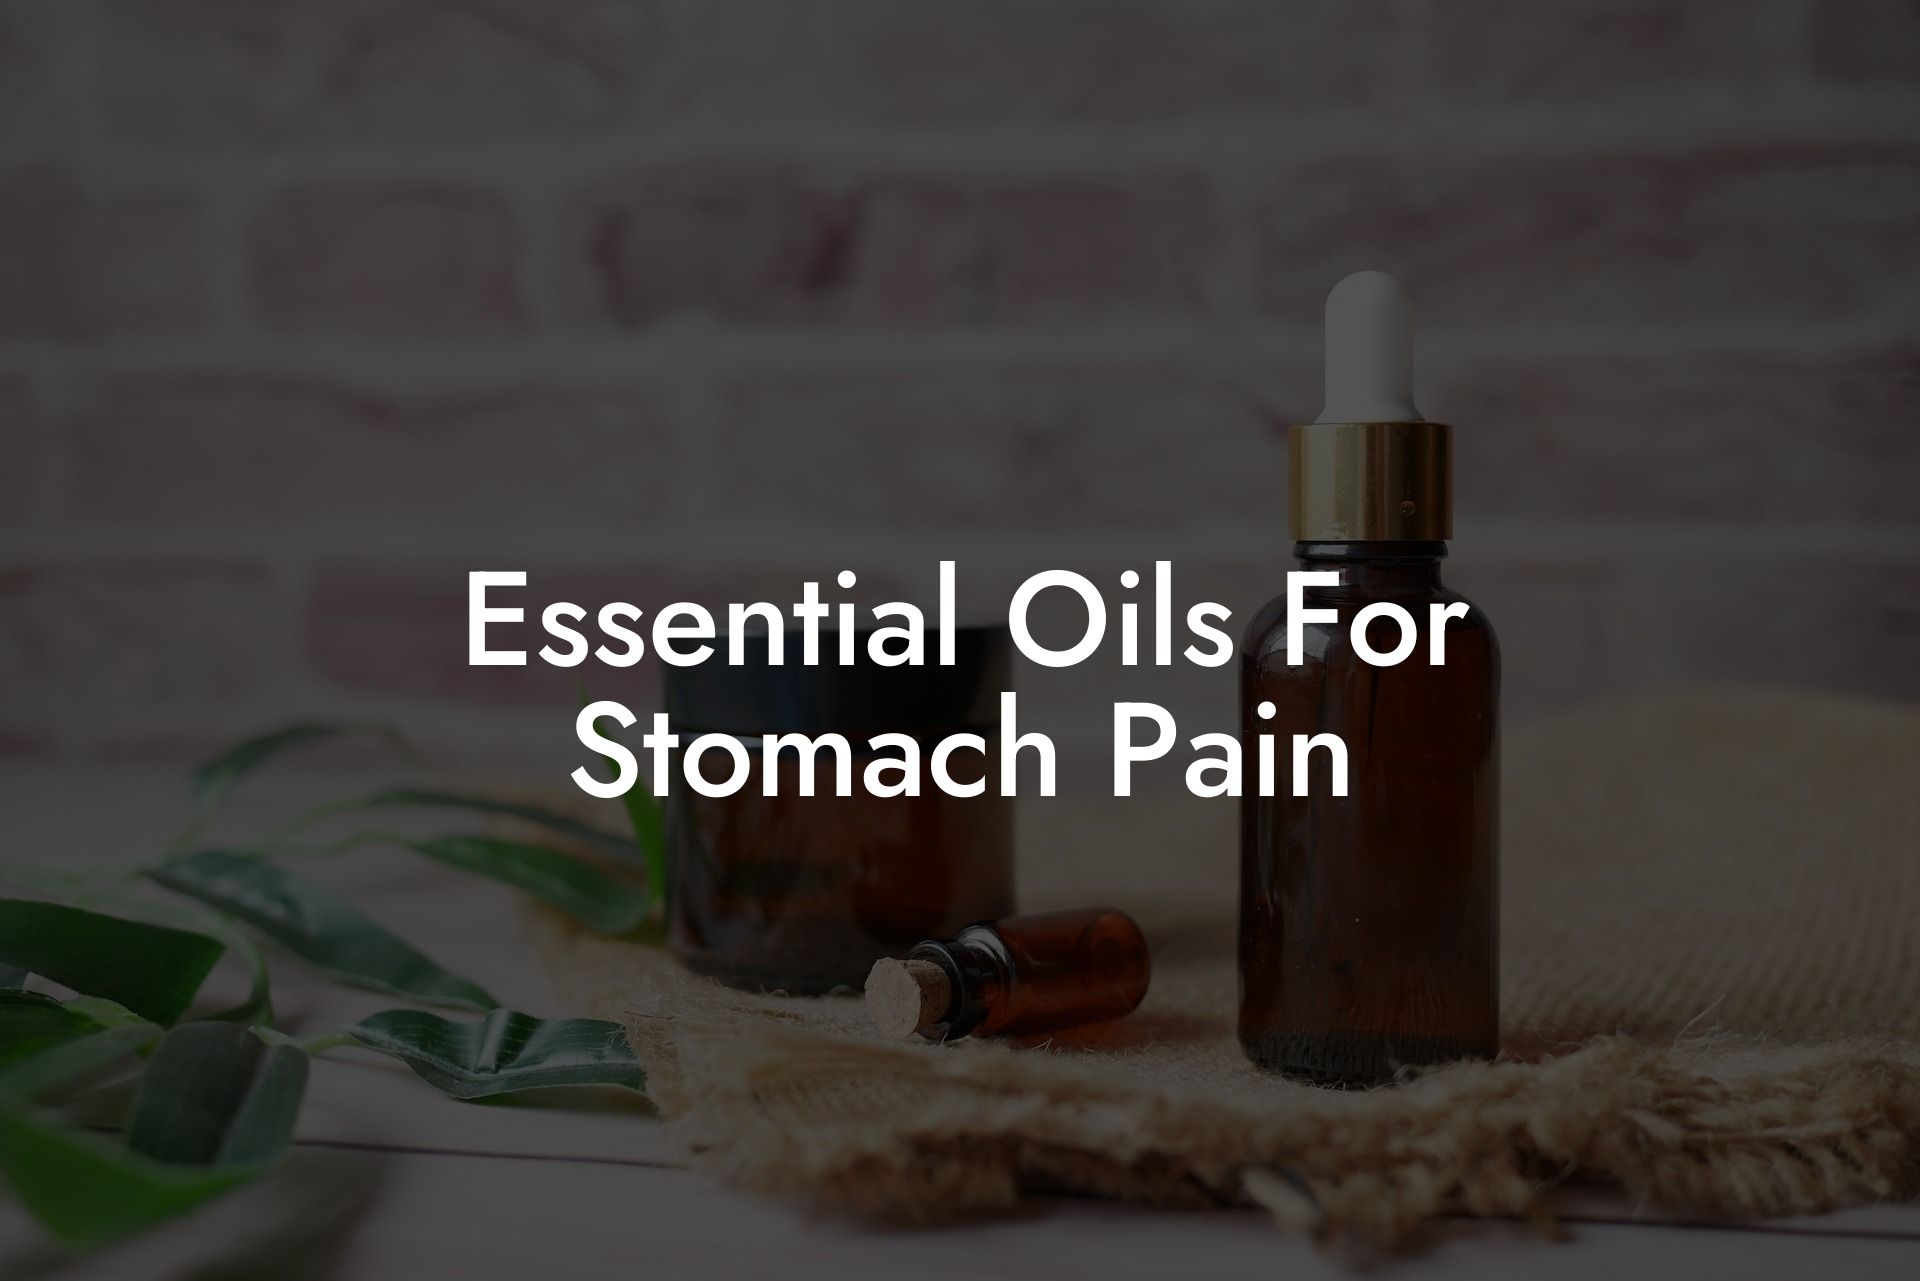 Essential Oils For Stomach Pain